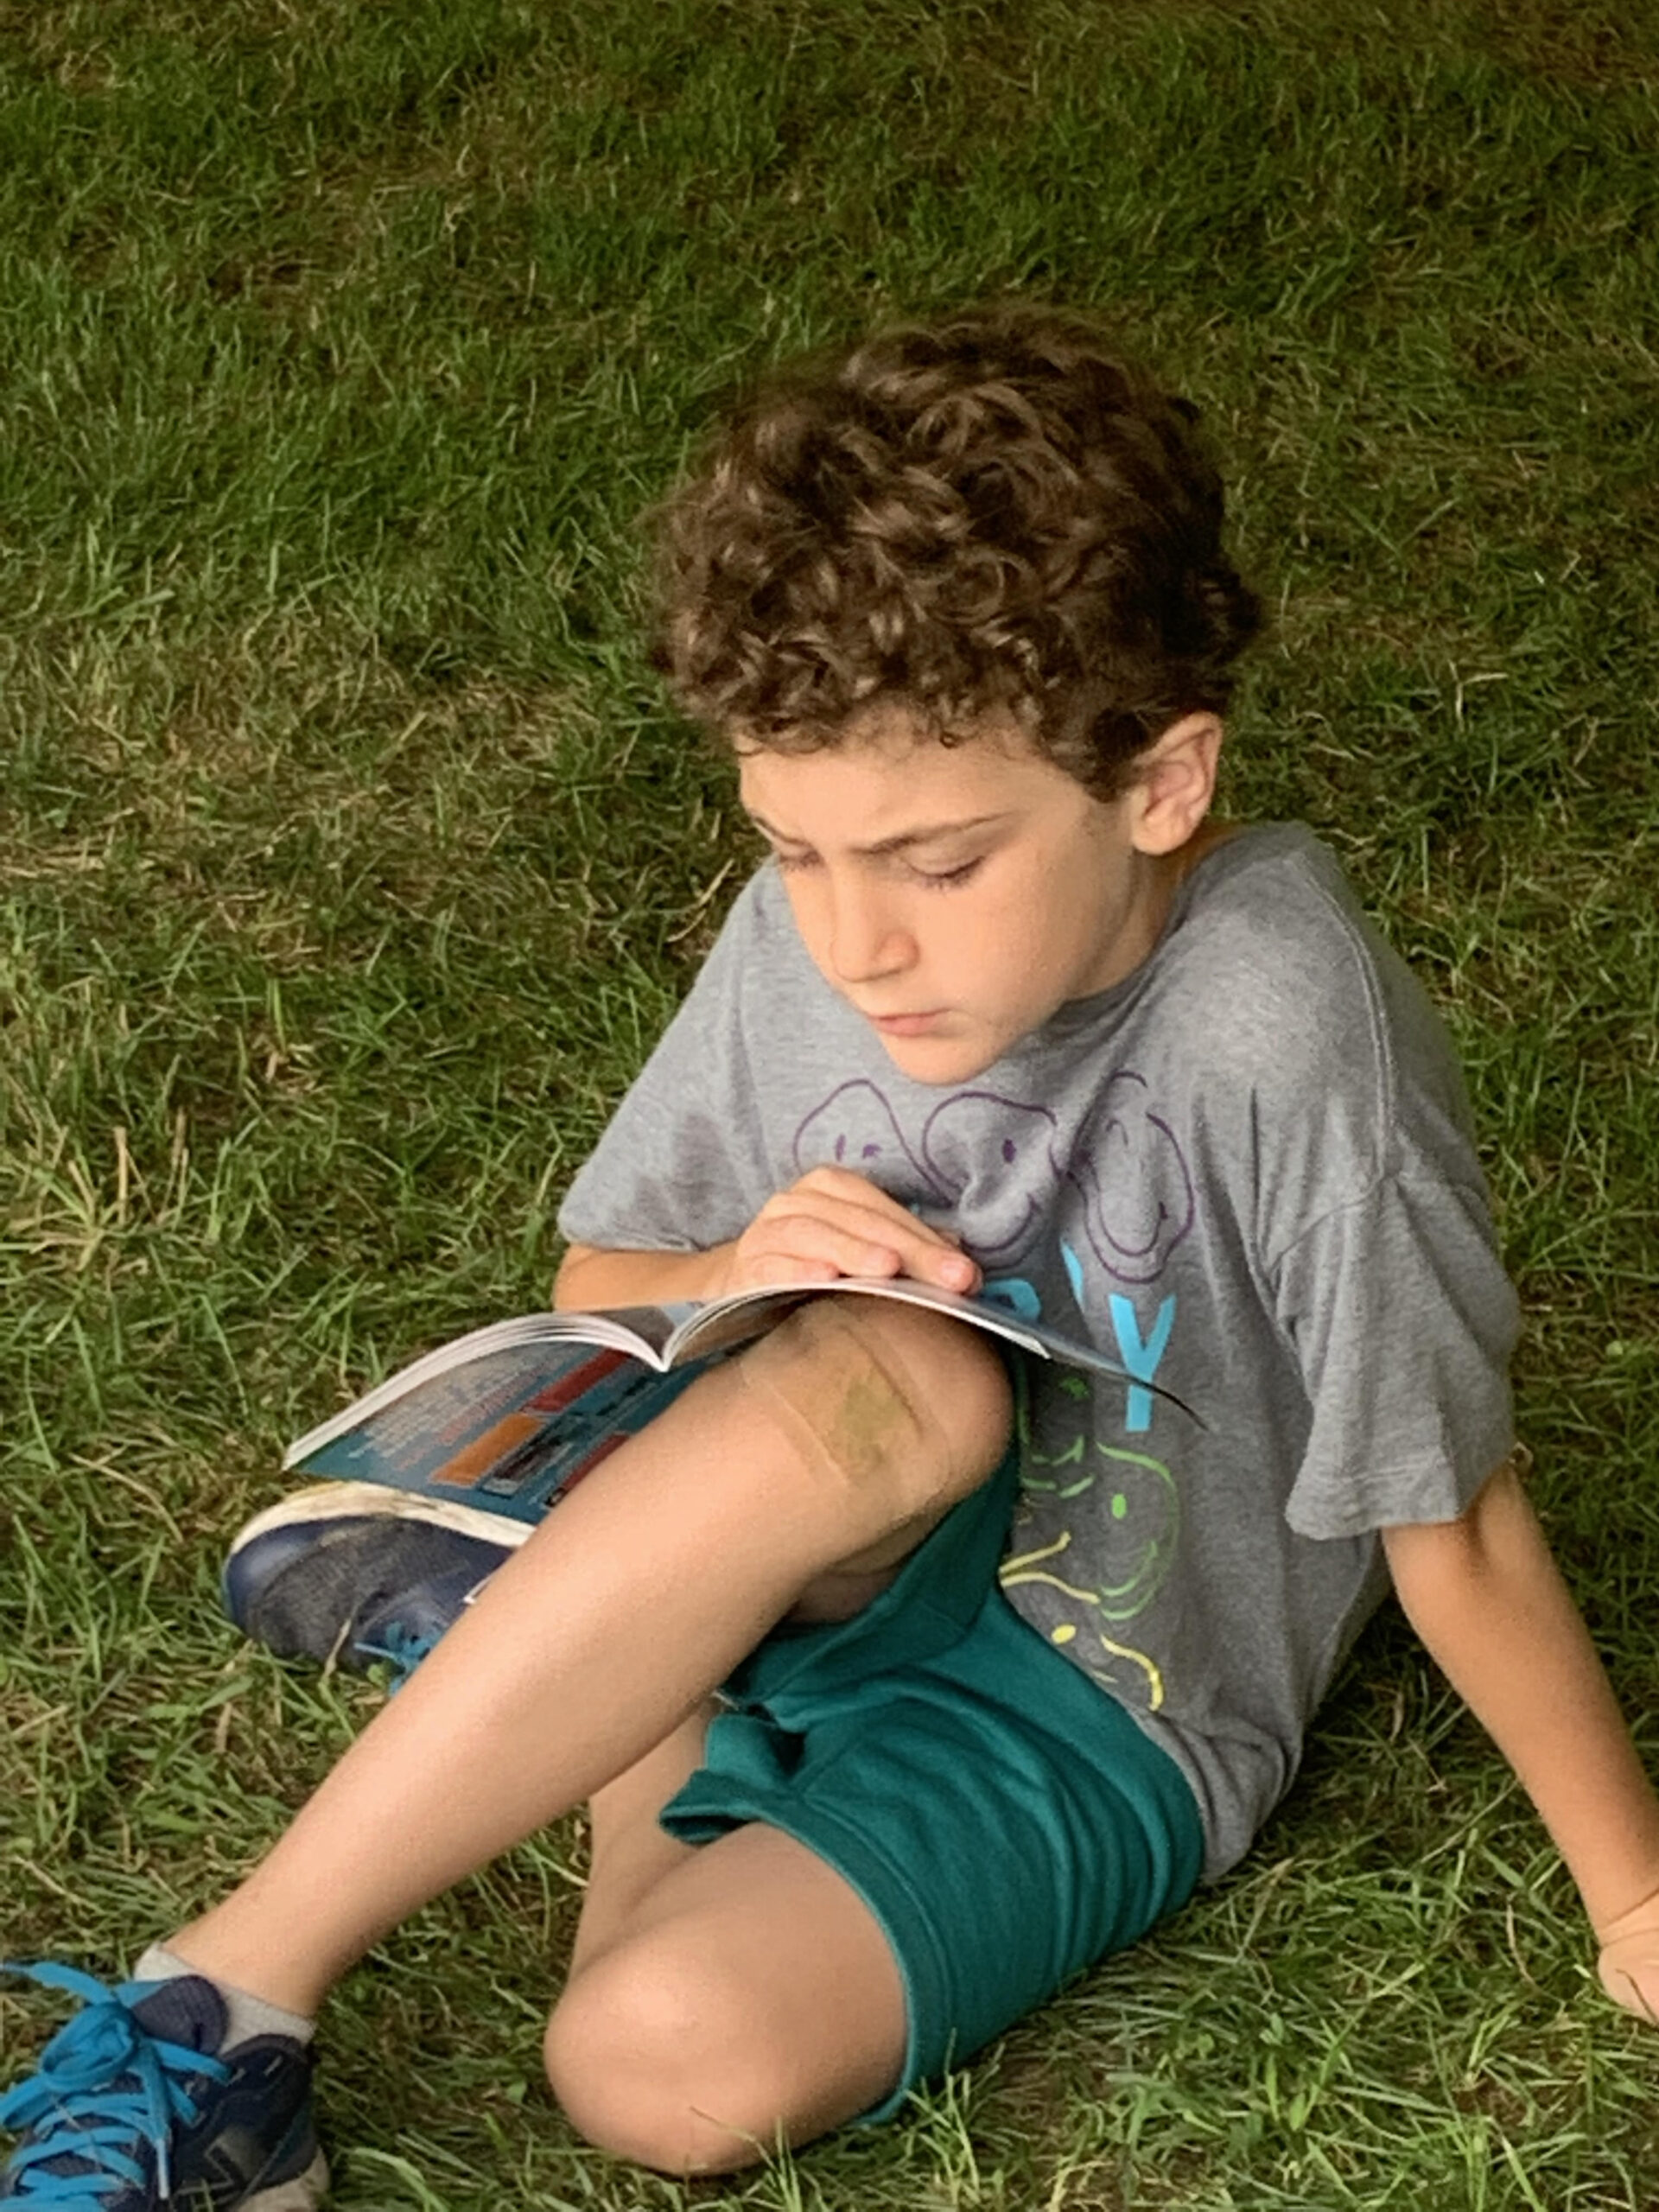 Child reading a book in the grass